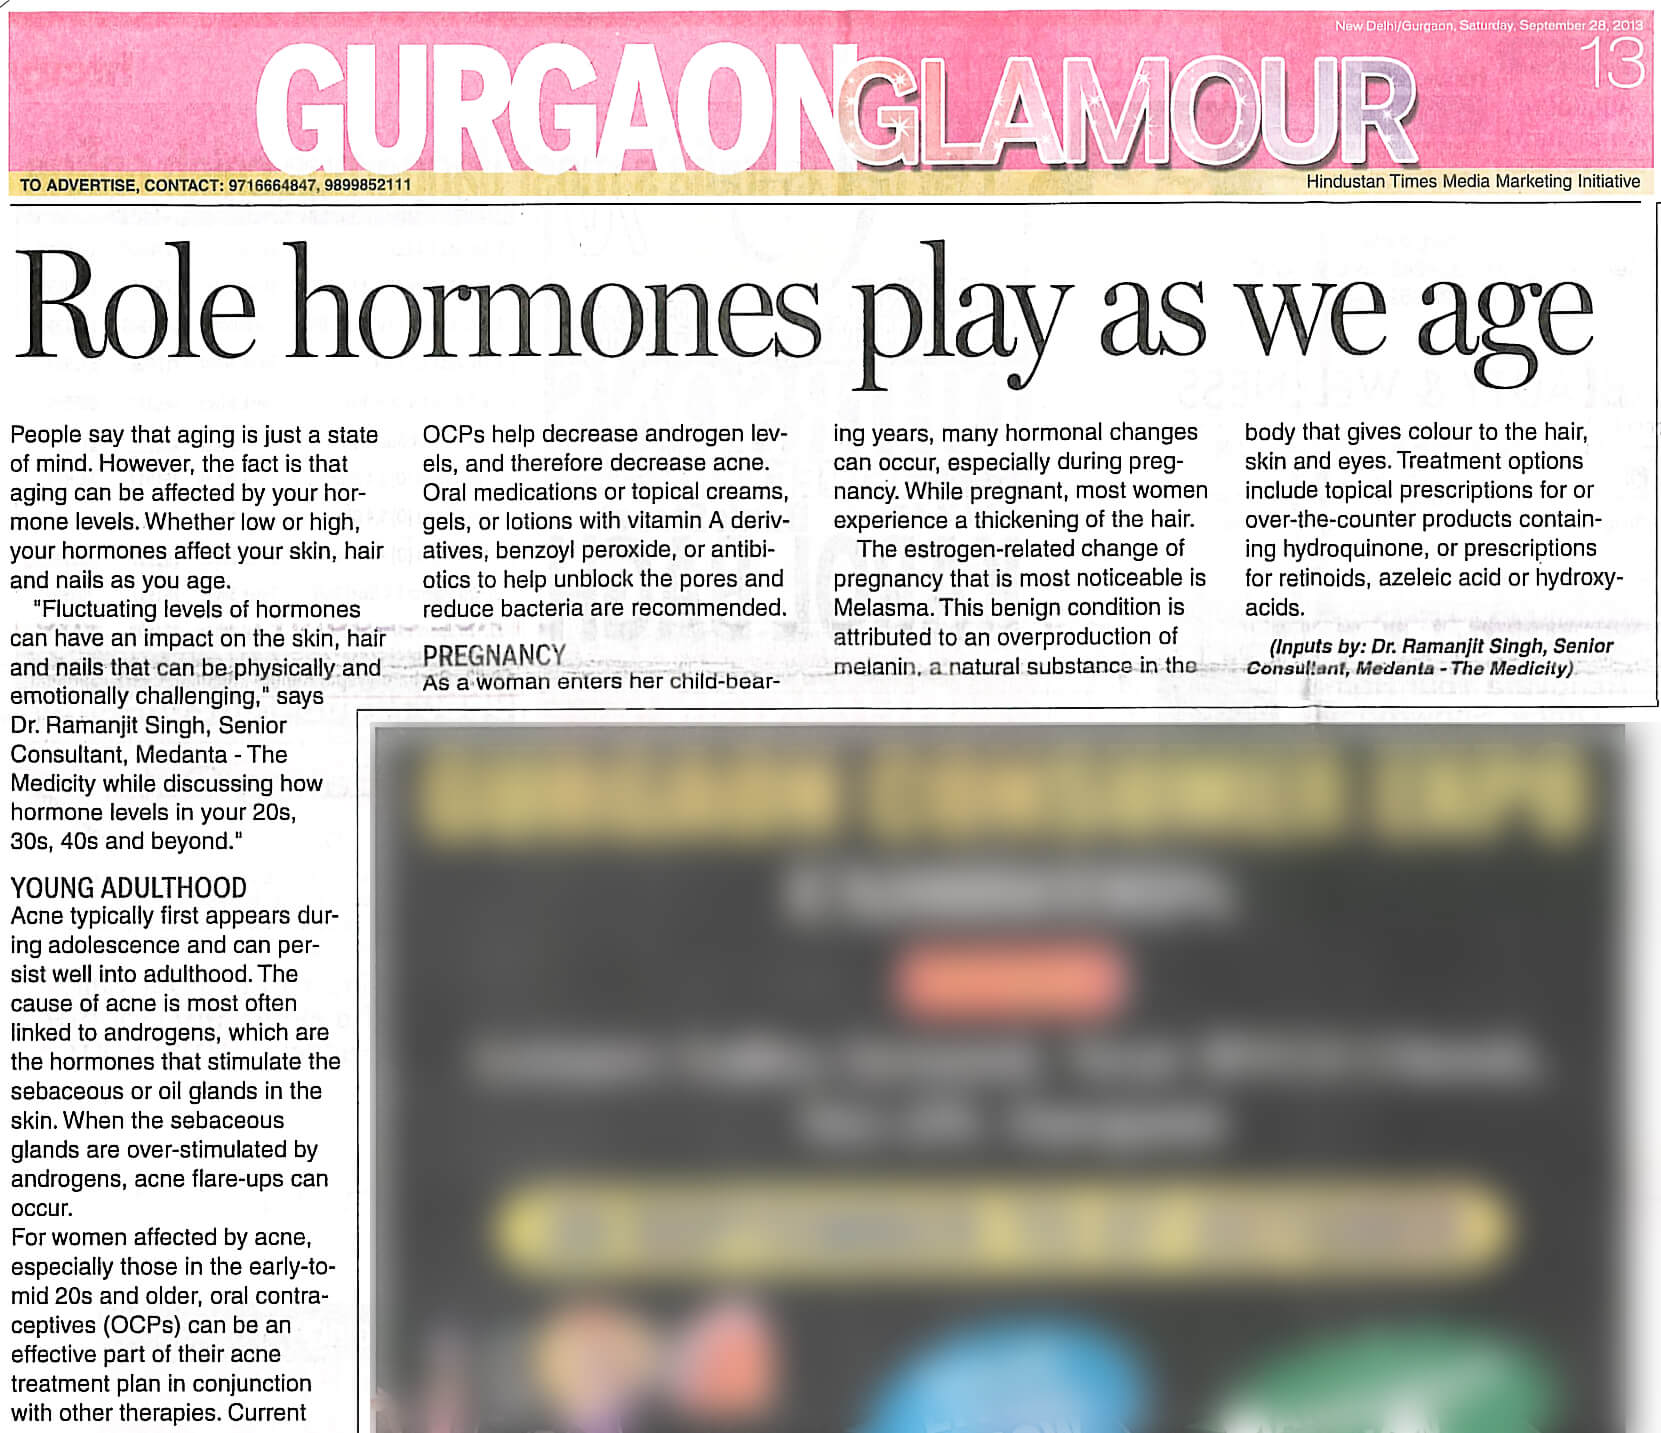 Role hormones play as we age